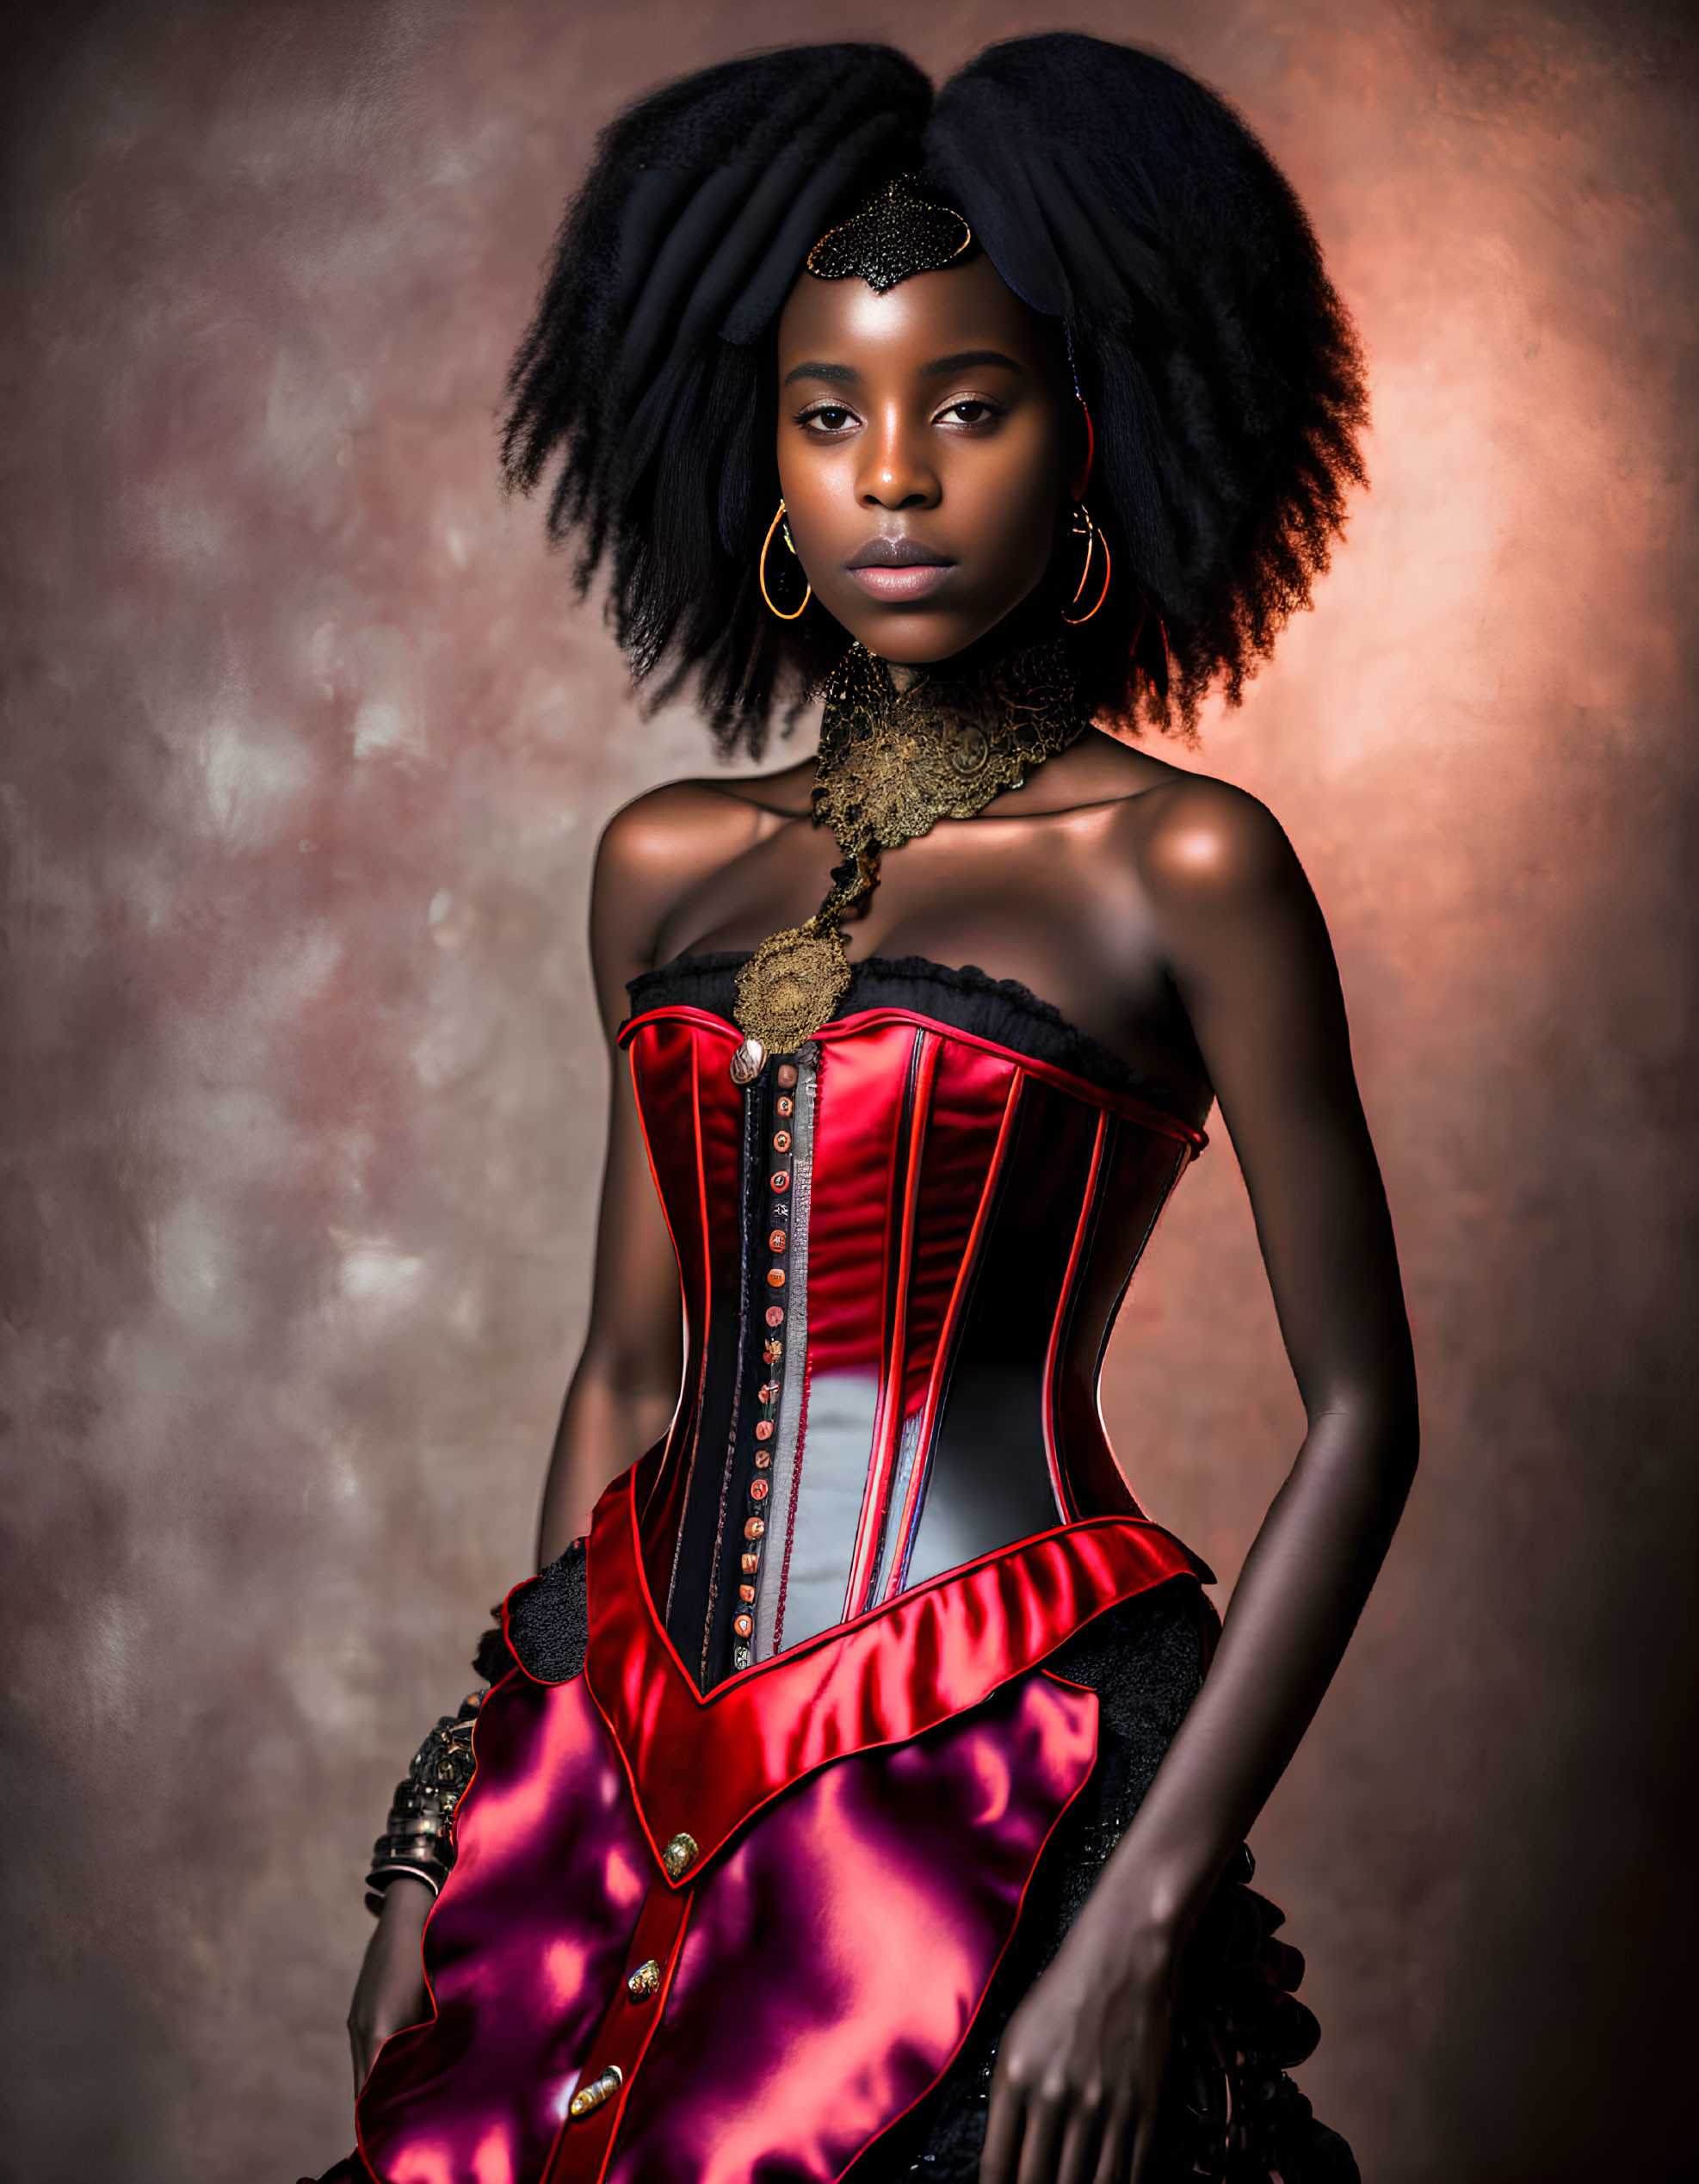 Woman in Red and Black Corset Dress with Voluminous Hair and Gold Jewelry